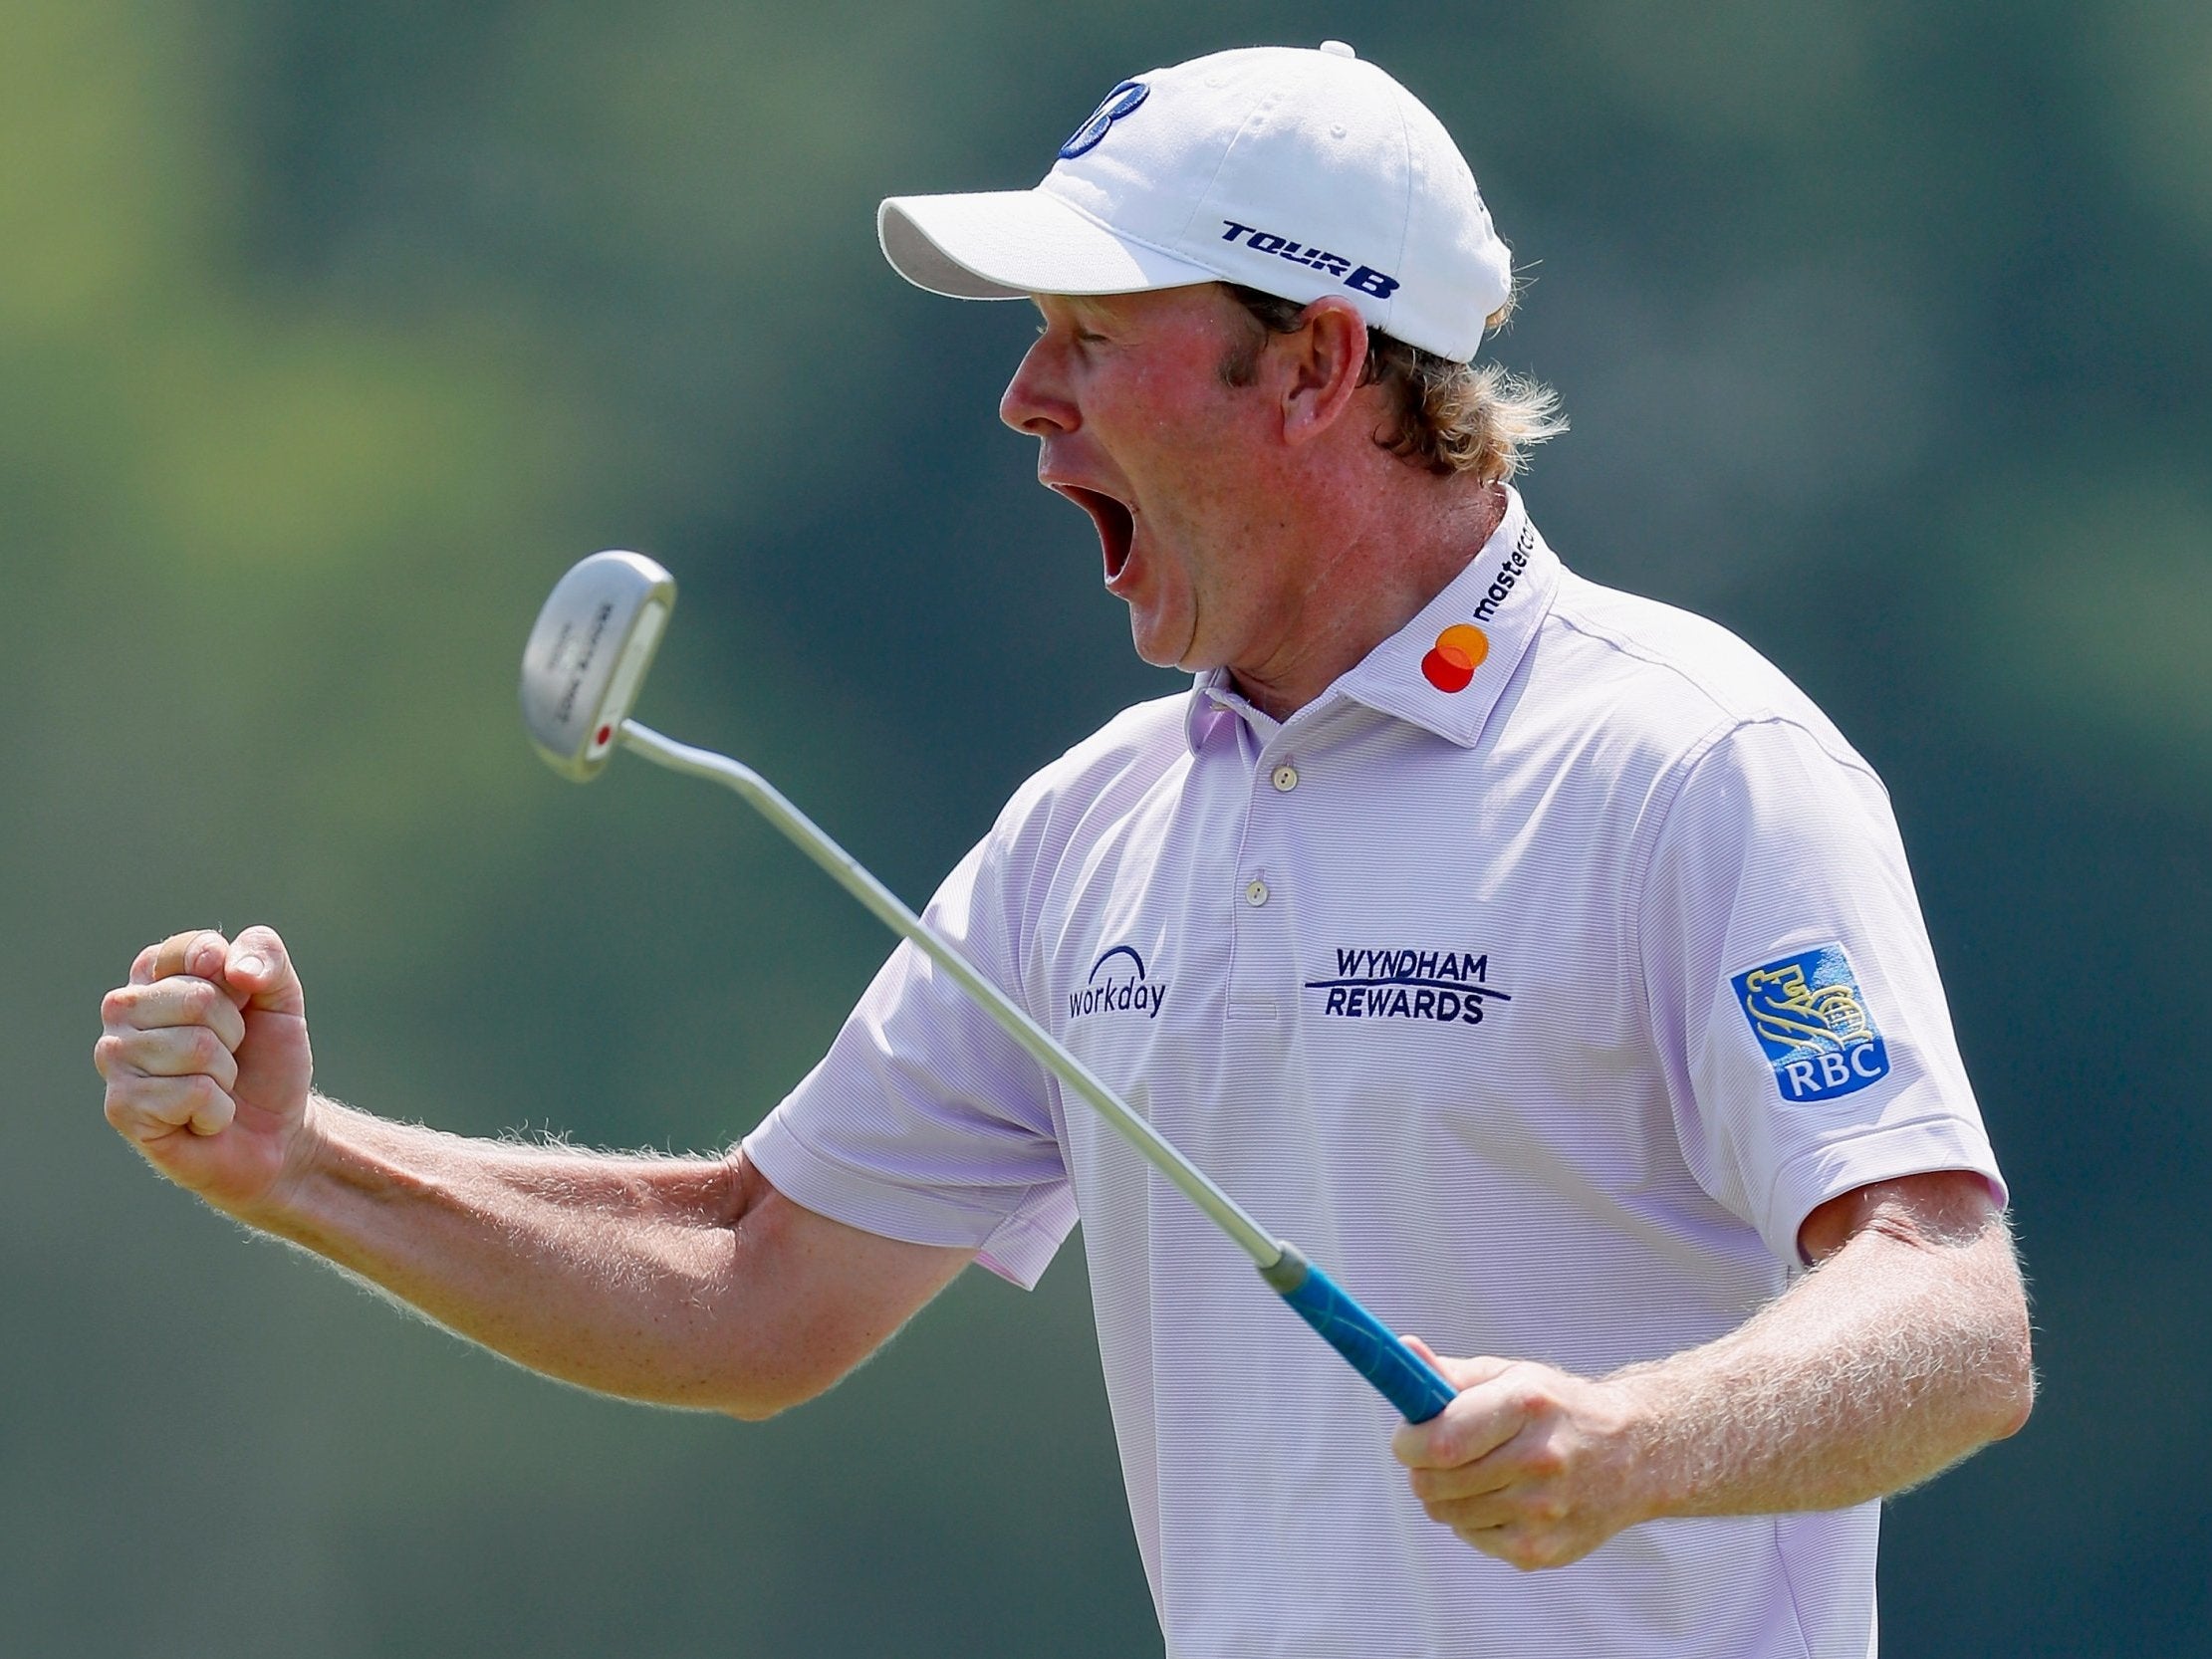 Brandt Snedeker celebrates after recording a round of 59 on Thursday at the Wyndham Championship